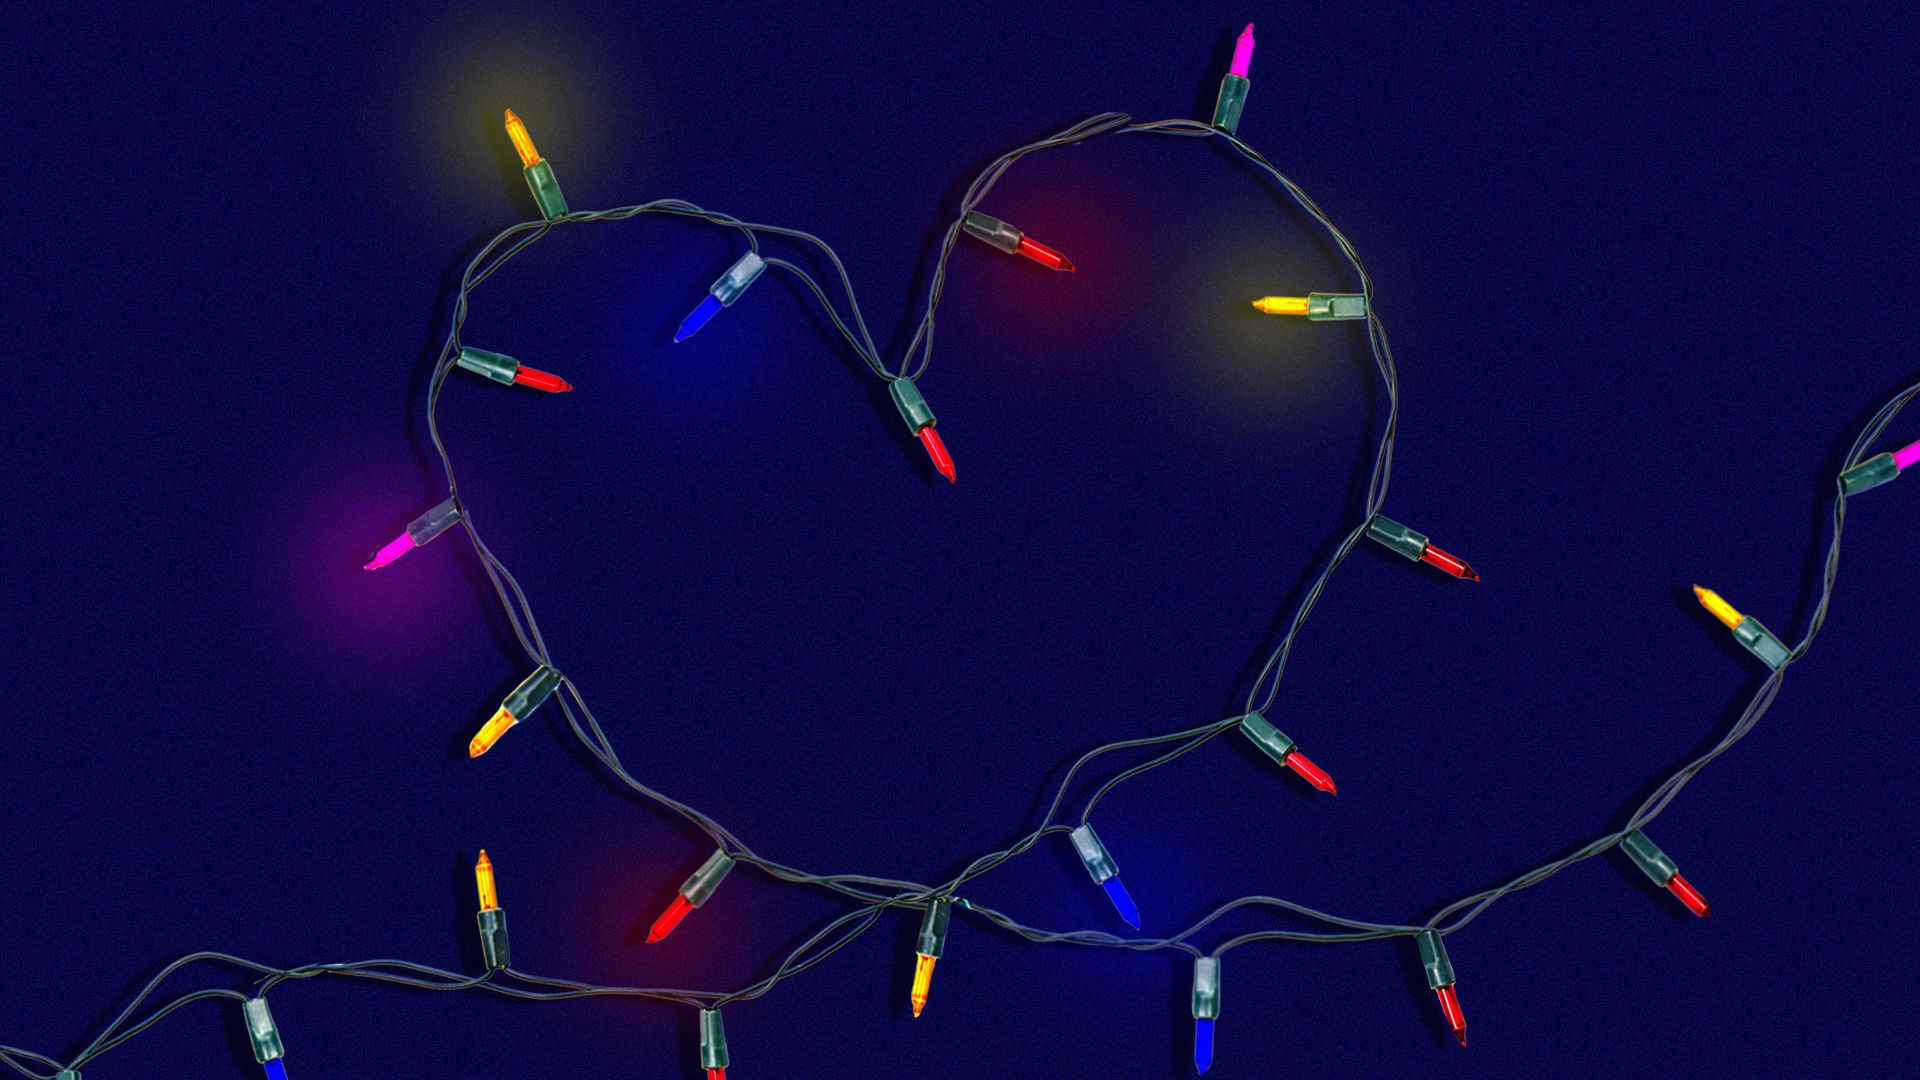 Illustration of holiday string lights in the shape of a heart.